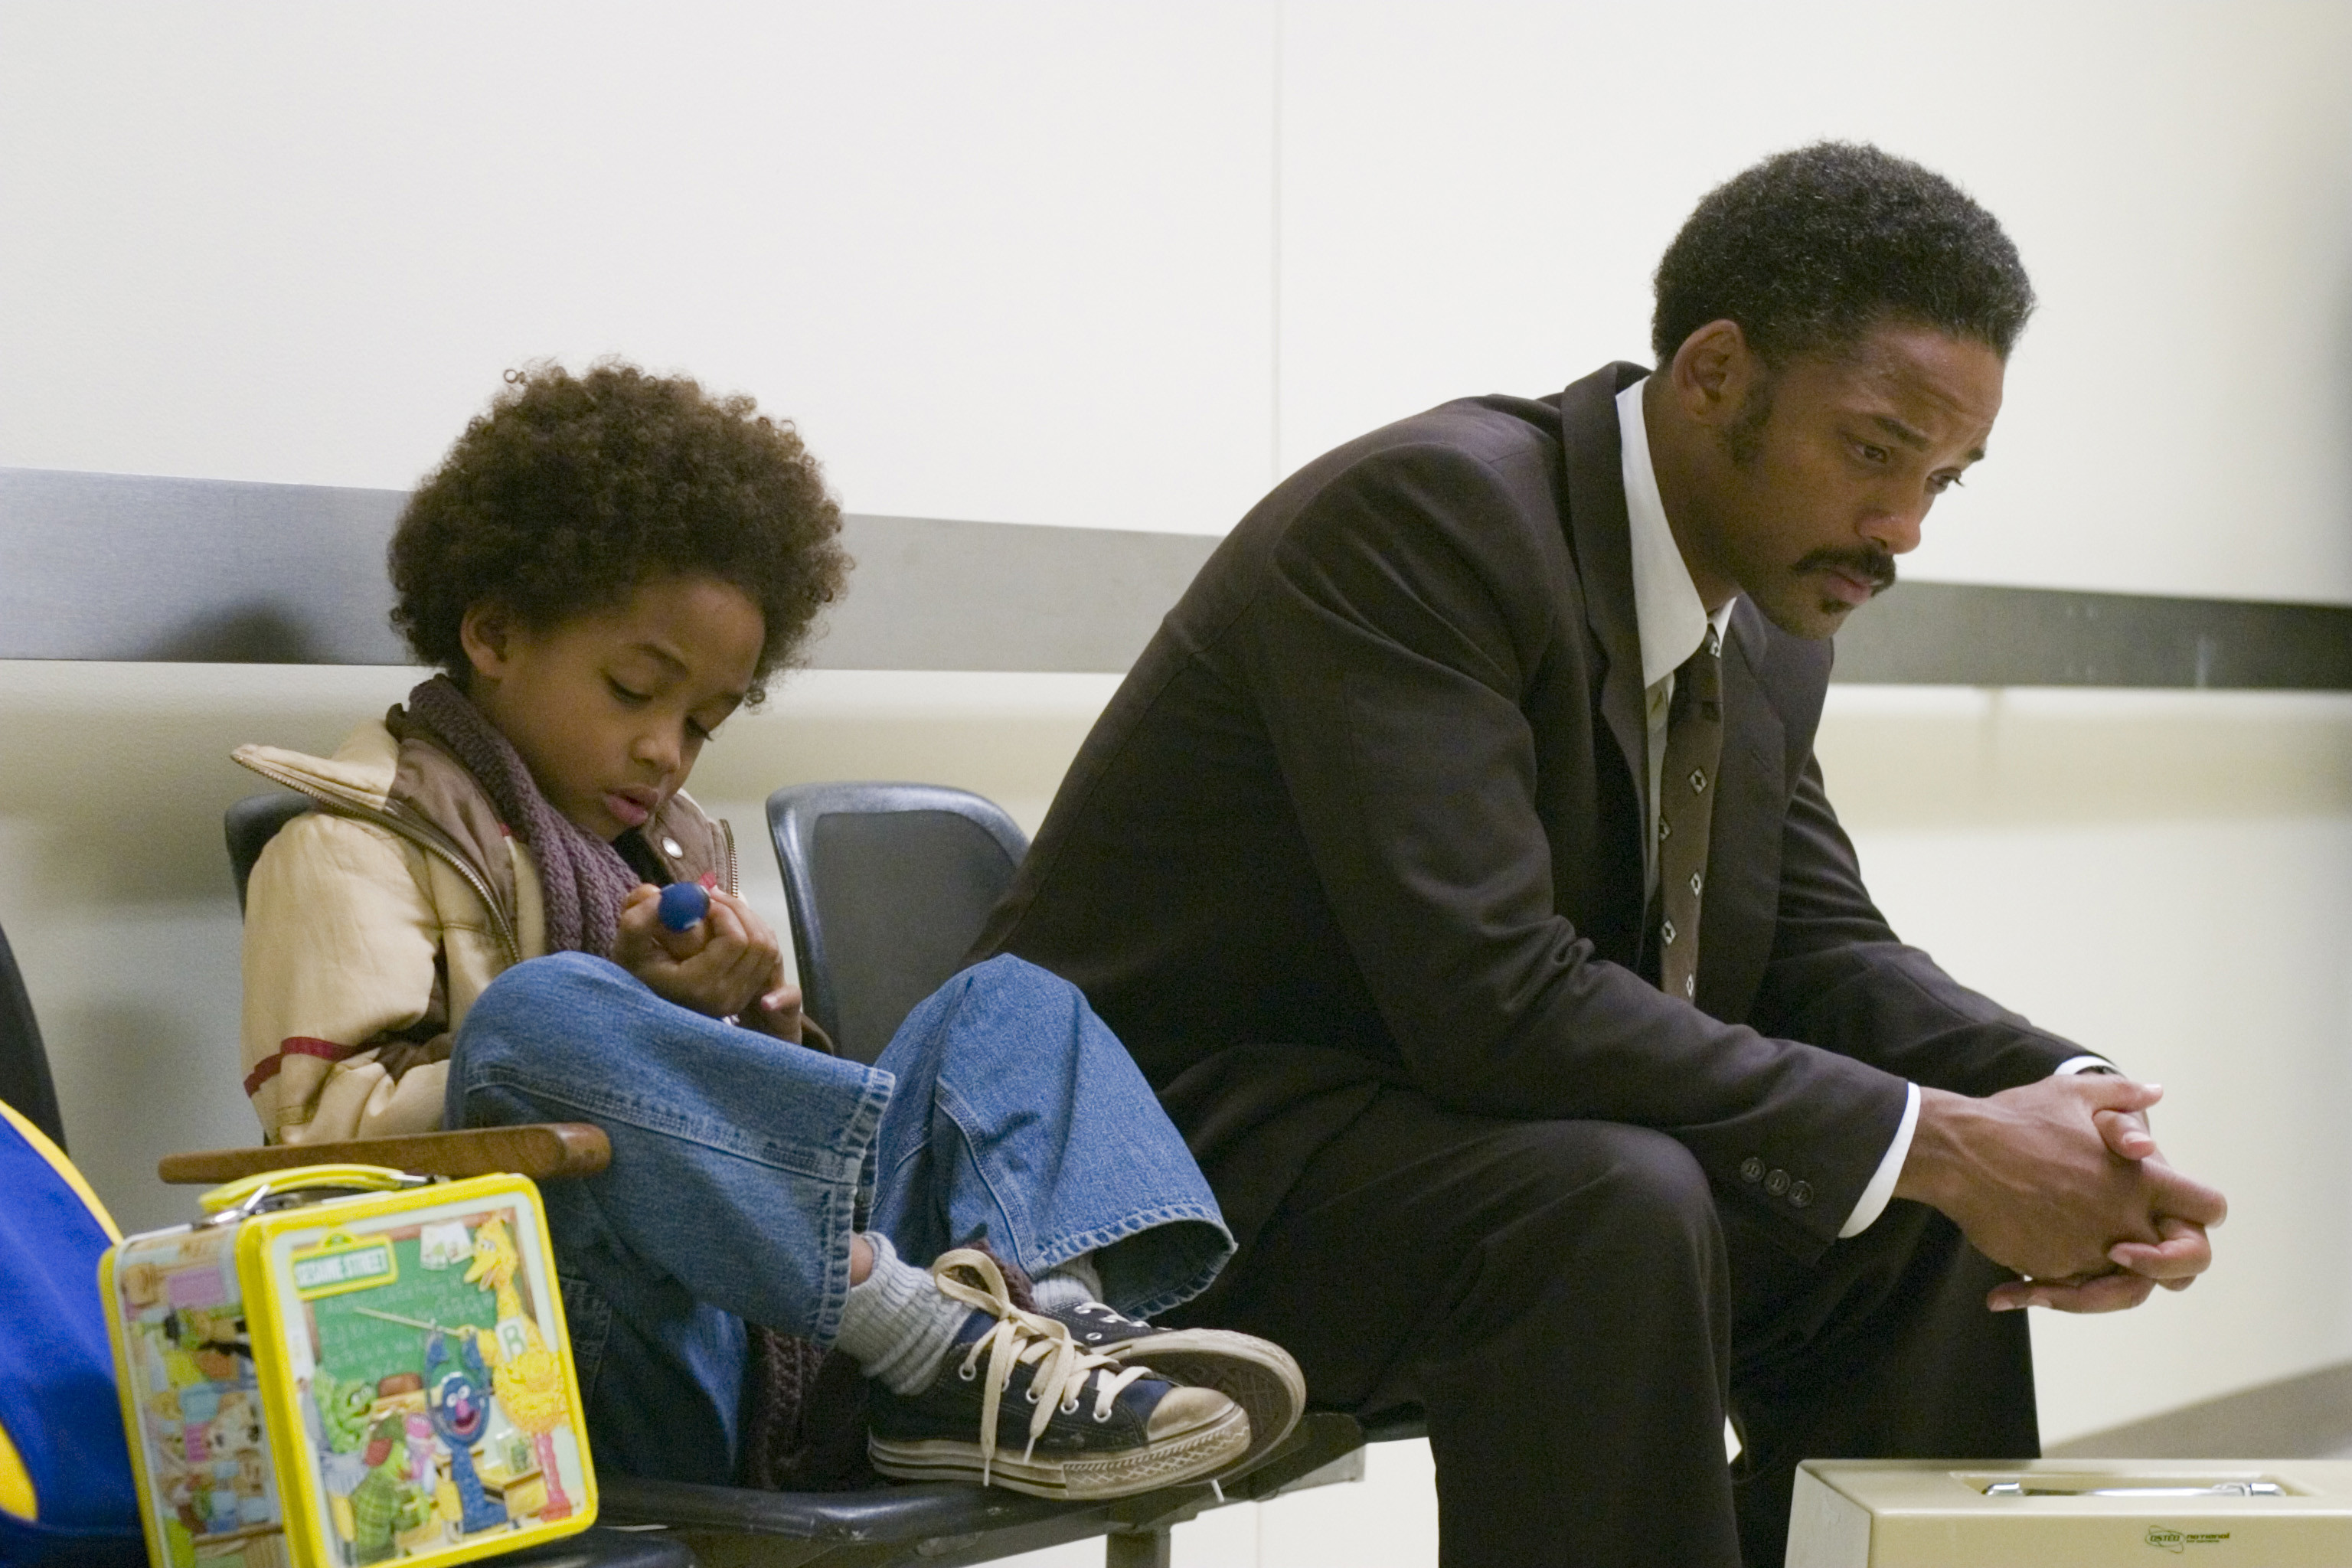 3072x2048 4 The Pursuit Of Happyness HD Wallpapers | Backgrounds - Wallpaper Abyss